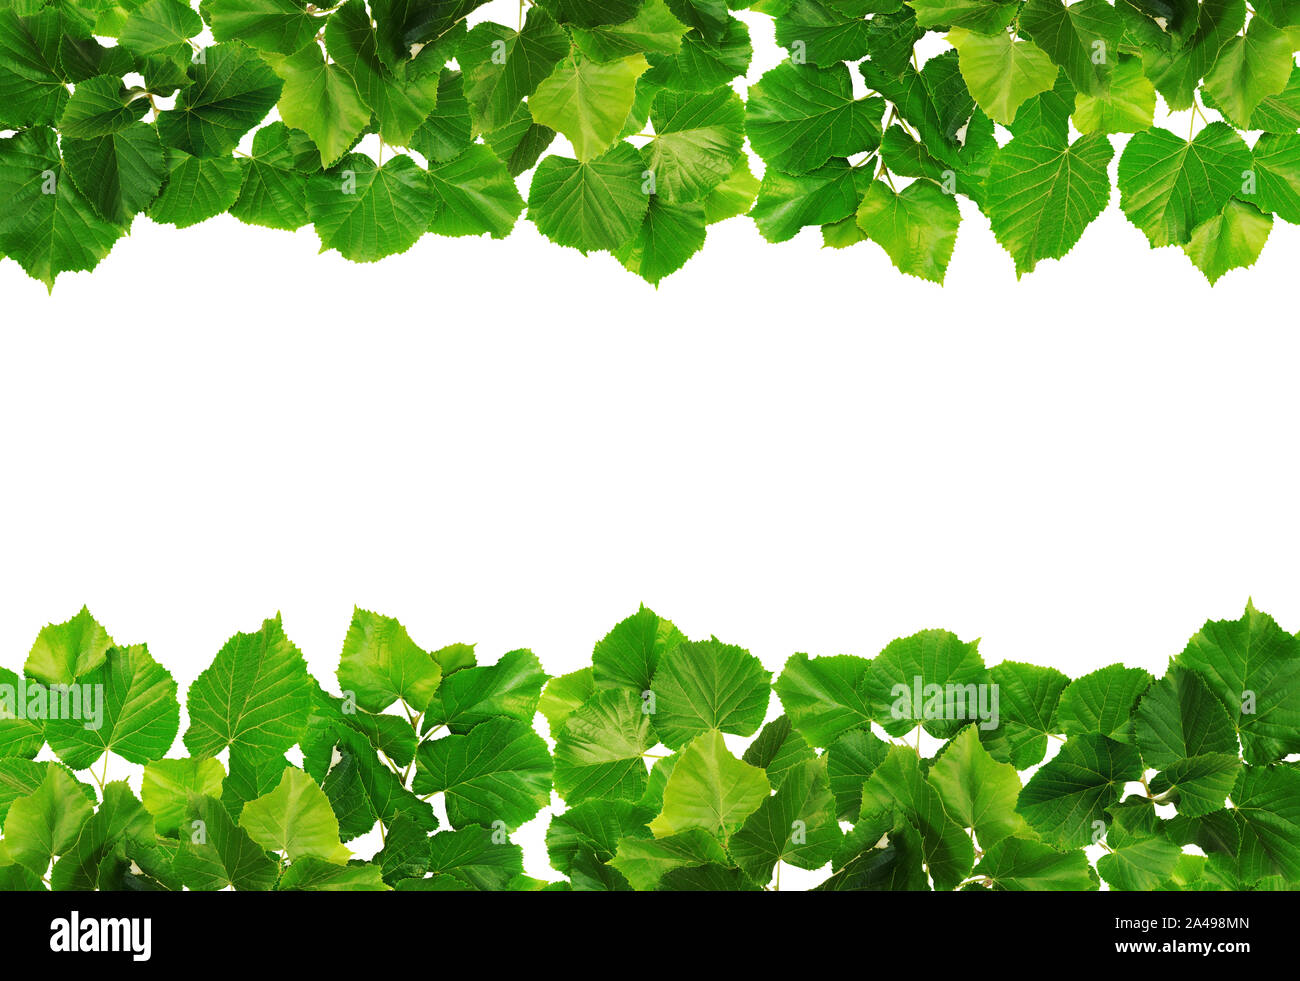 Linden leaves forming a double green row around a white area. Stock Photo